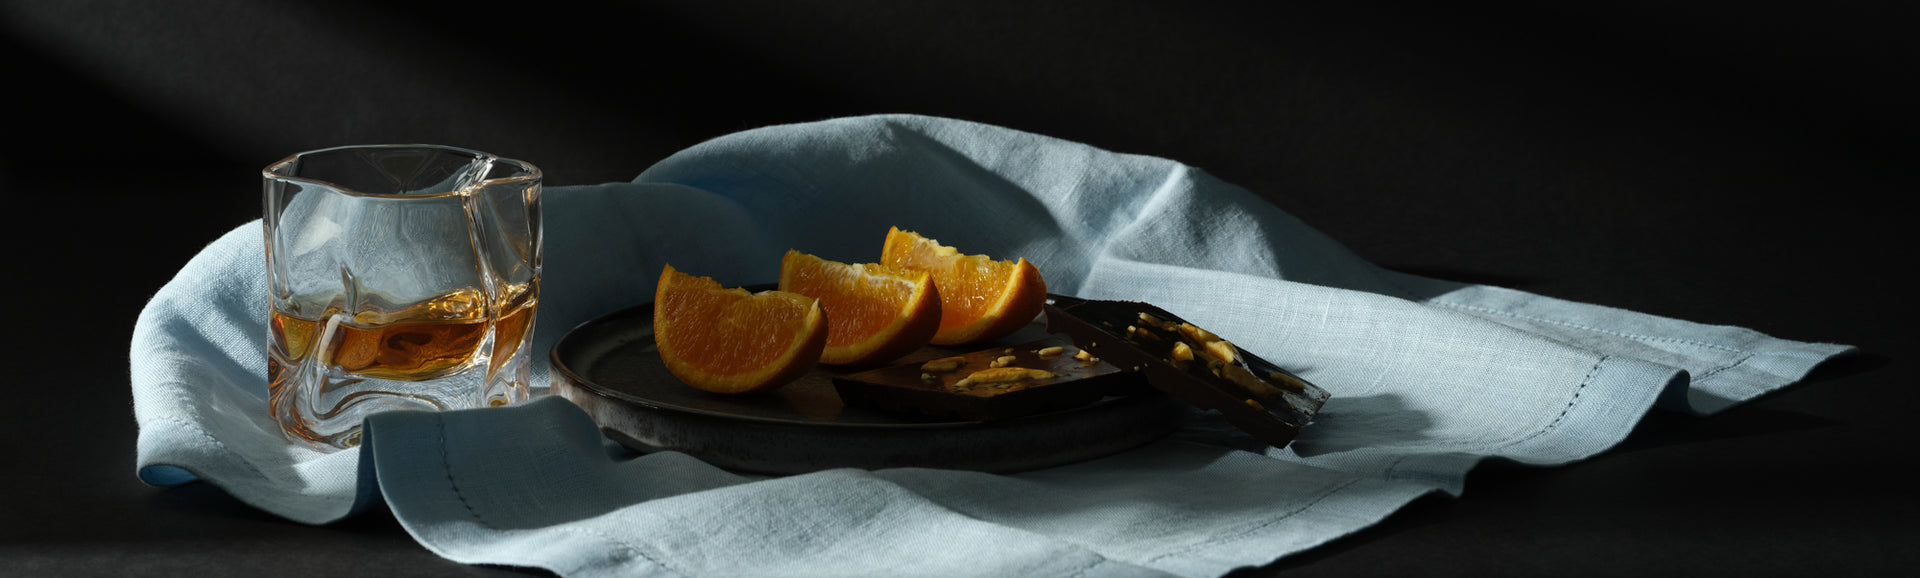 A Malt & Brew Whisky Wave Glass sits on a blue cloth with a plate of orange slices and dark chocolate.